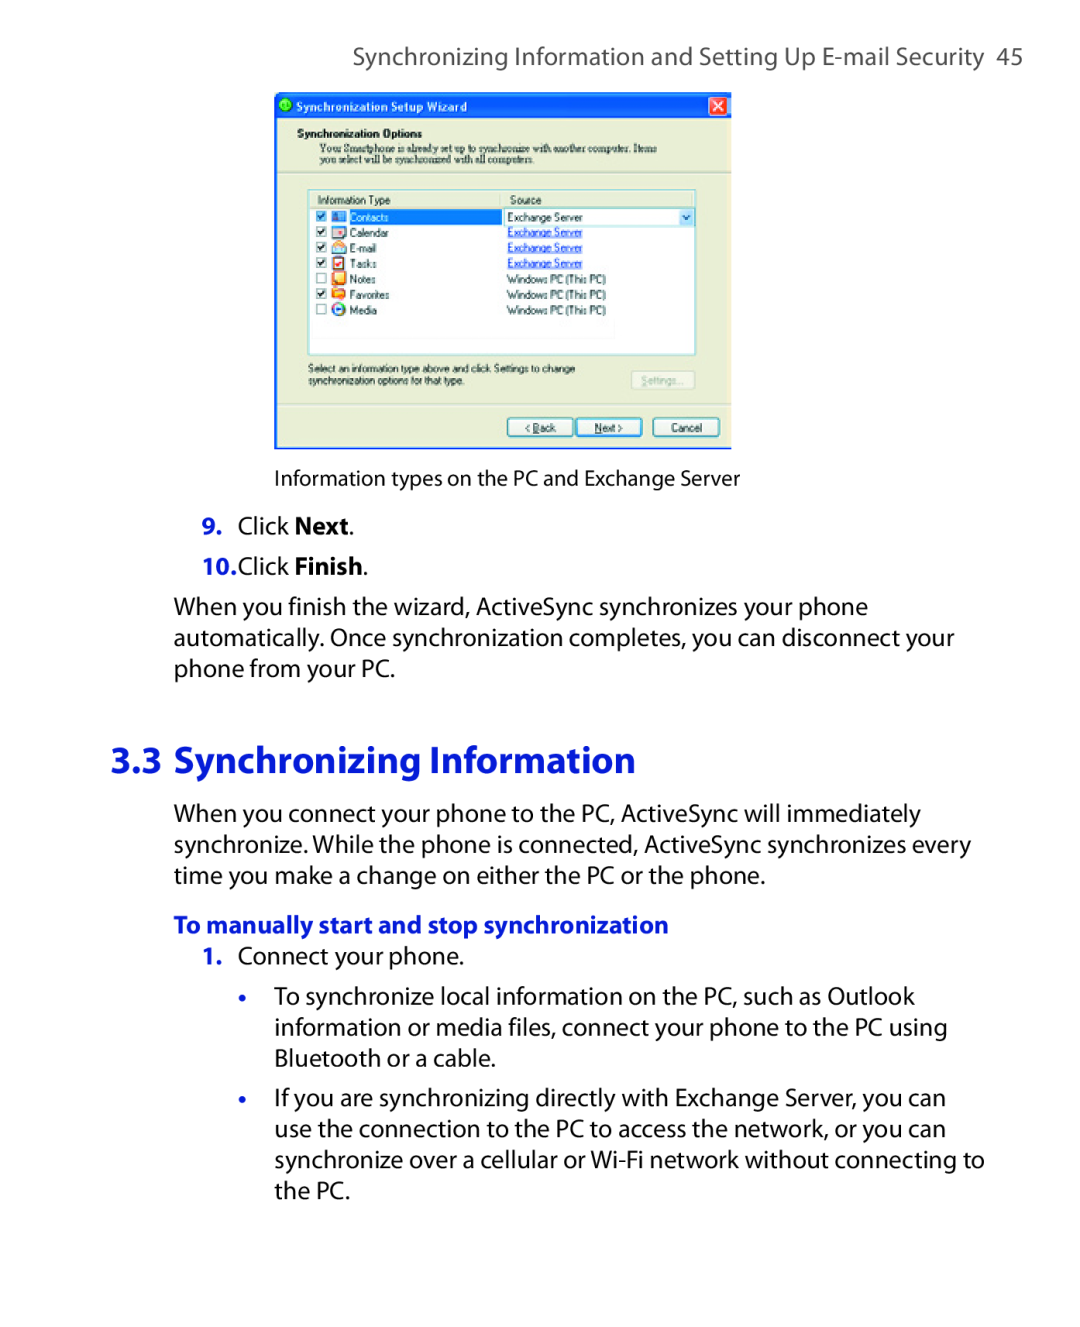 HTC HTC S621 Synchronizing Information and Setting Up E-mail Security, To manually start and stop synchronization 